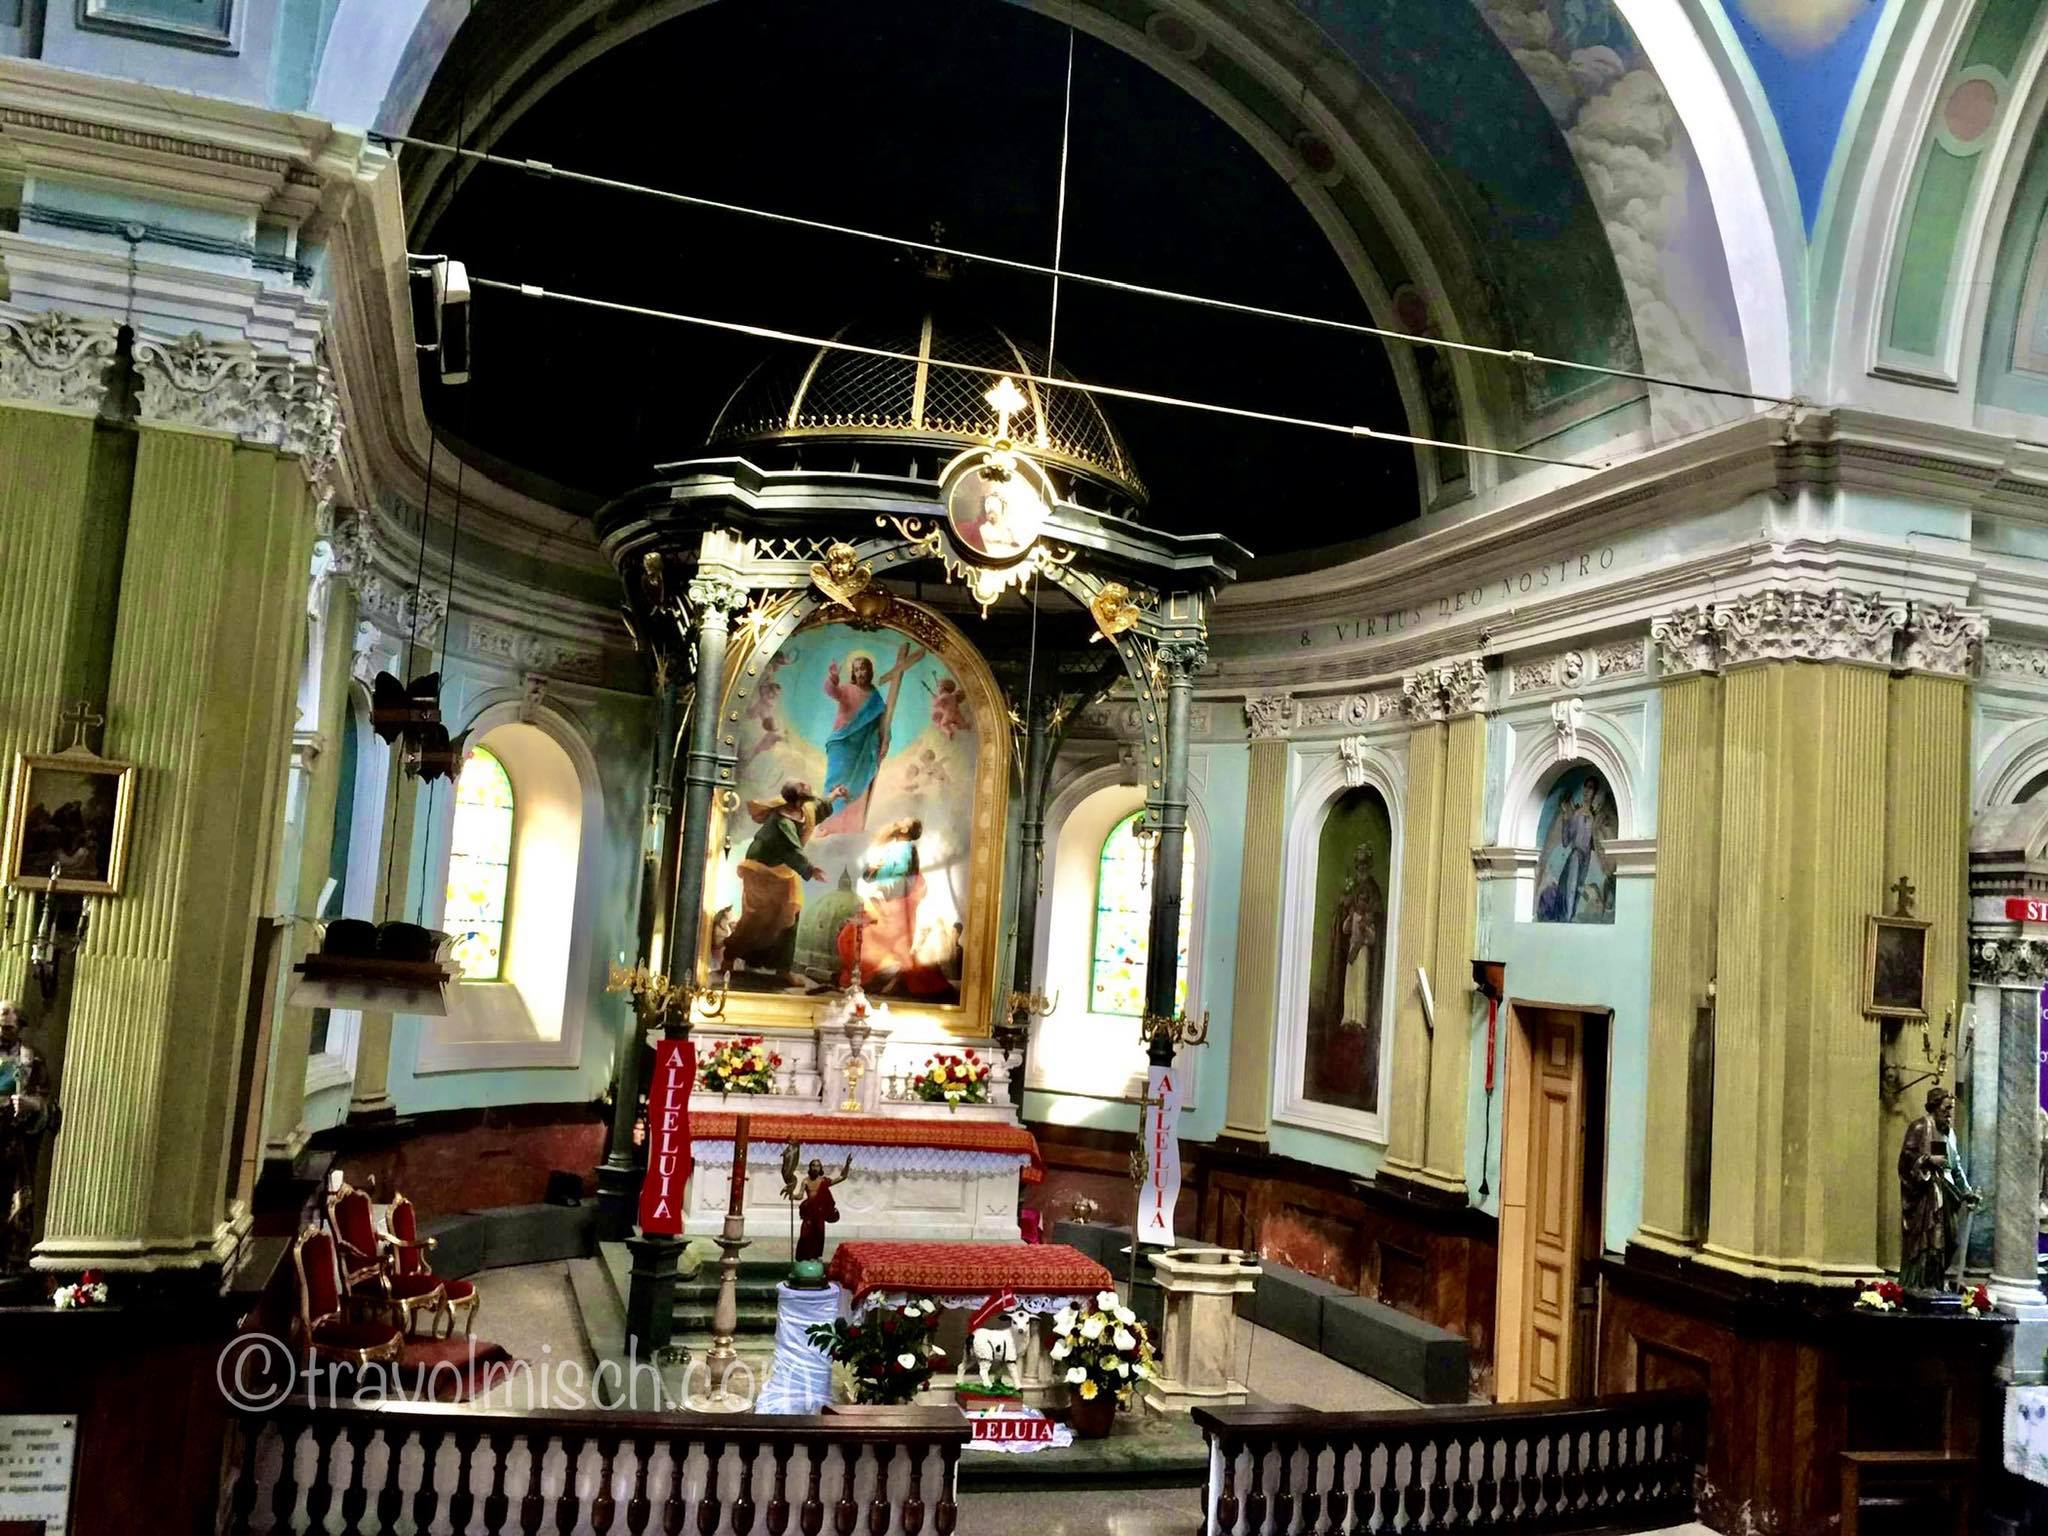 View of the altar